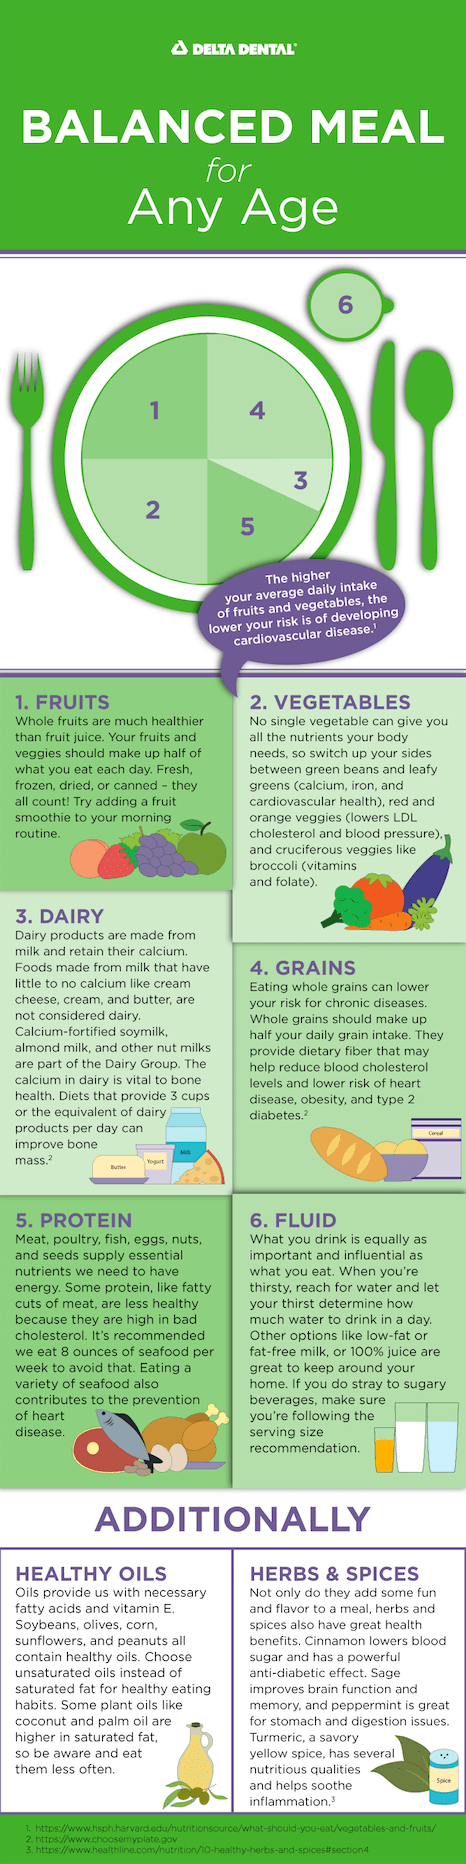 Balanced Meal for Any Age Infographic, Nutrition for Healthy Aging